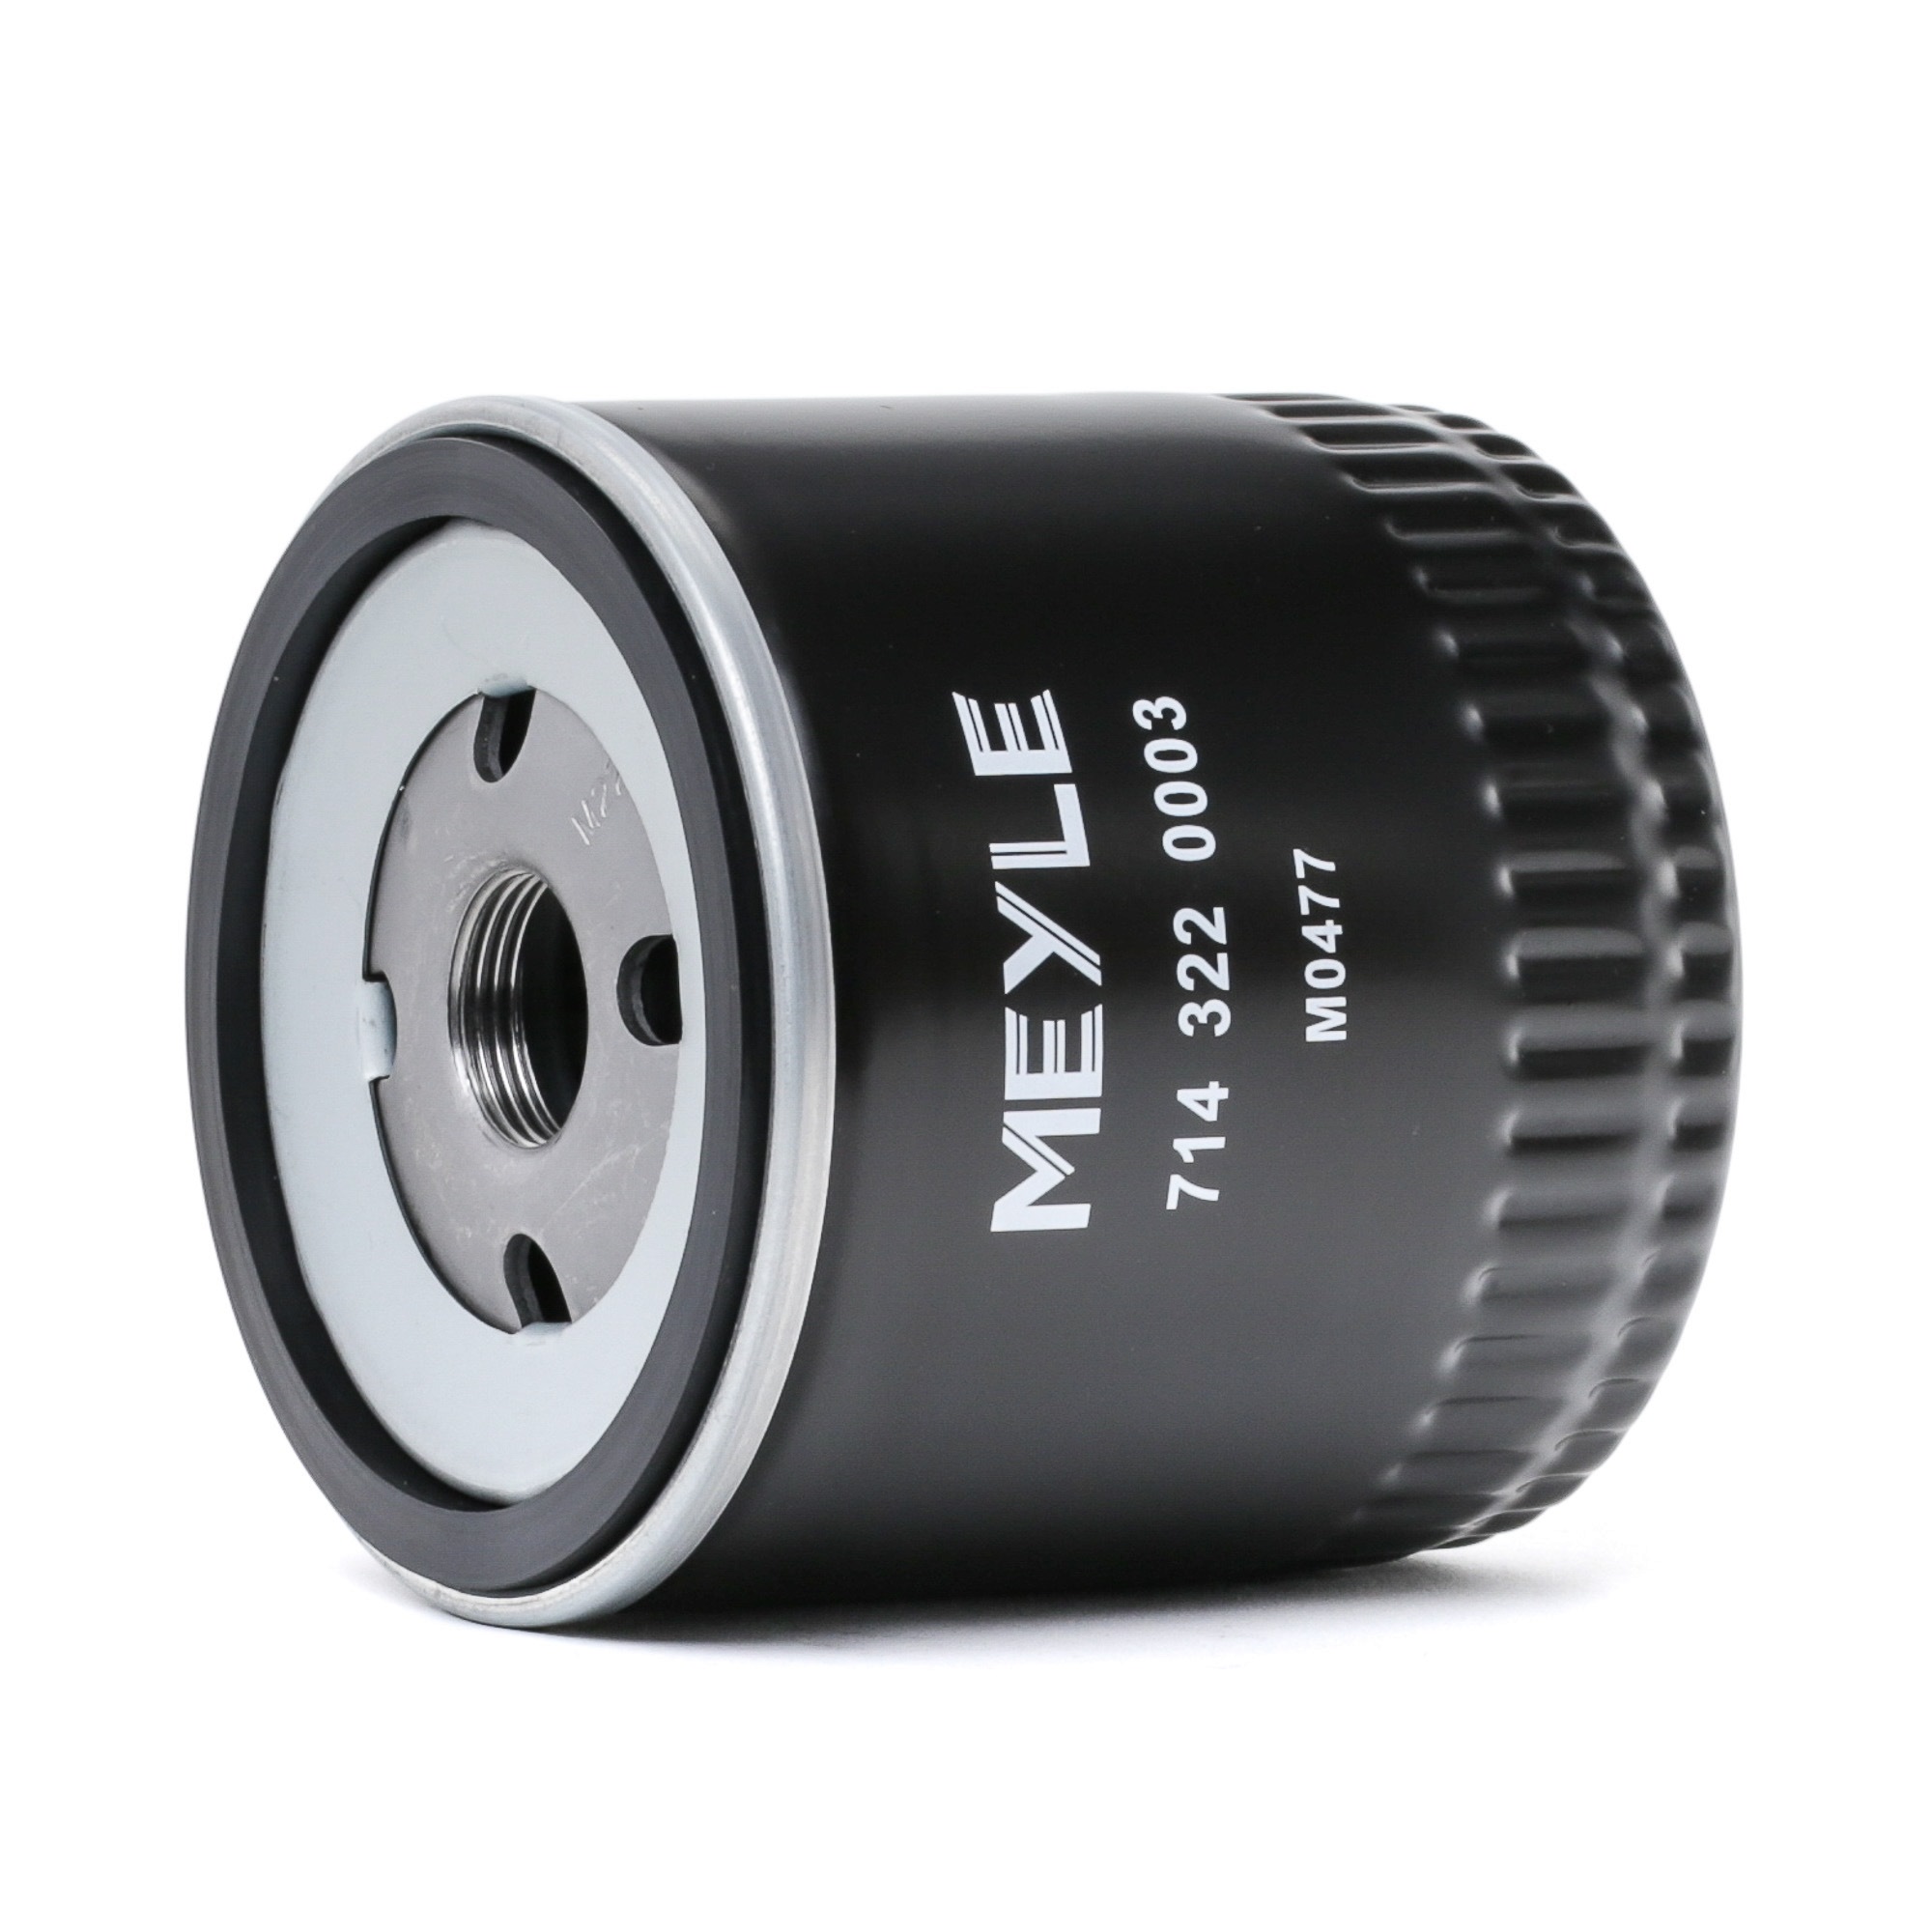 Original MEYLE MOF0199 Oil filters 714 322 0003 for FORD TRANSIT CONNECT